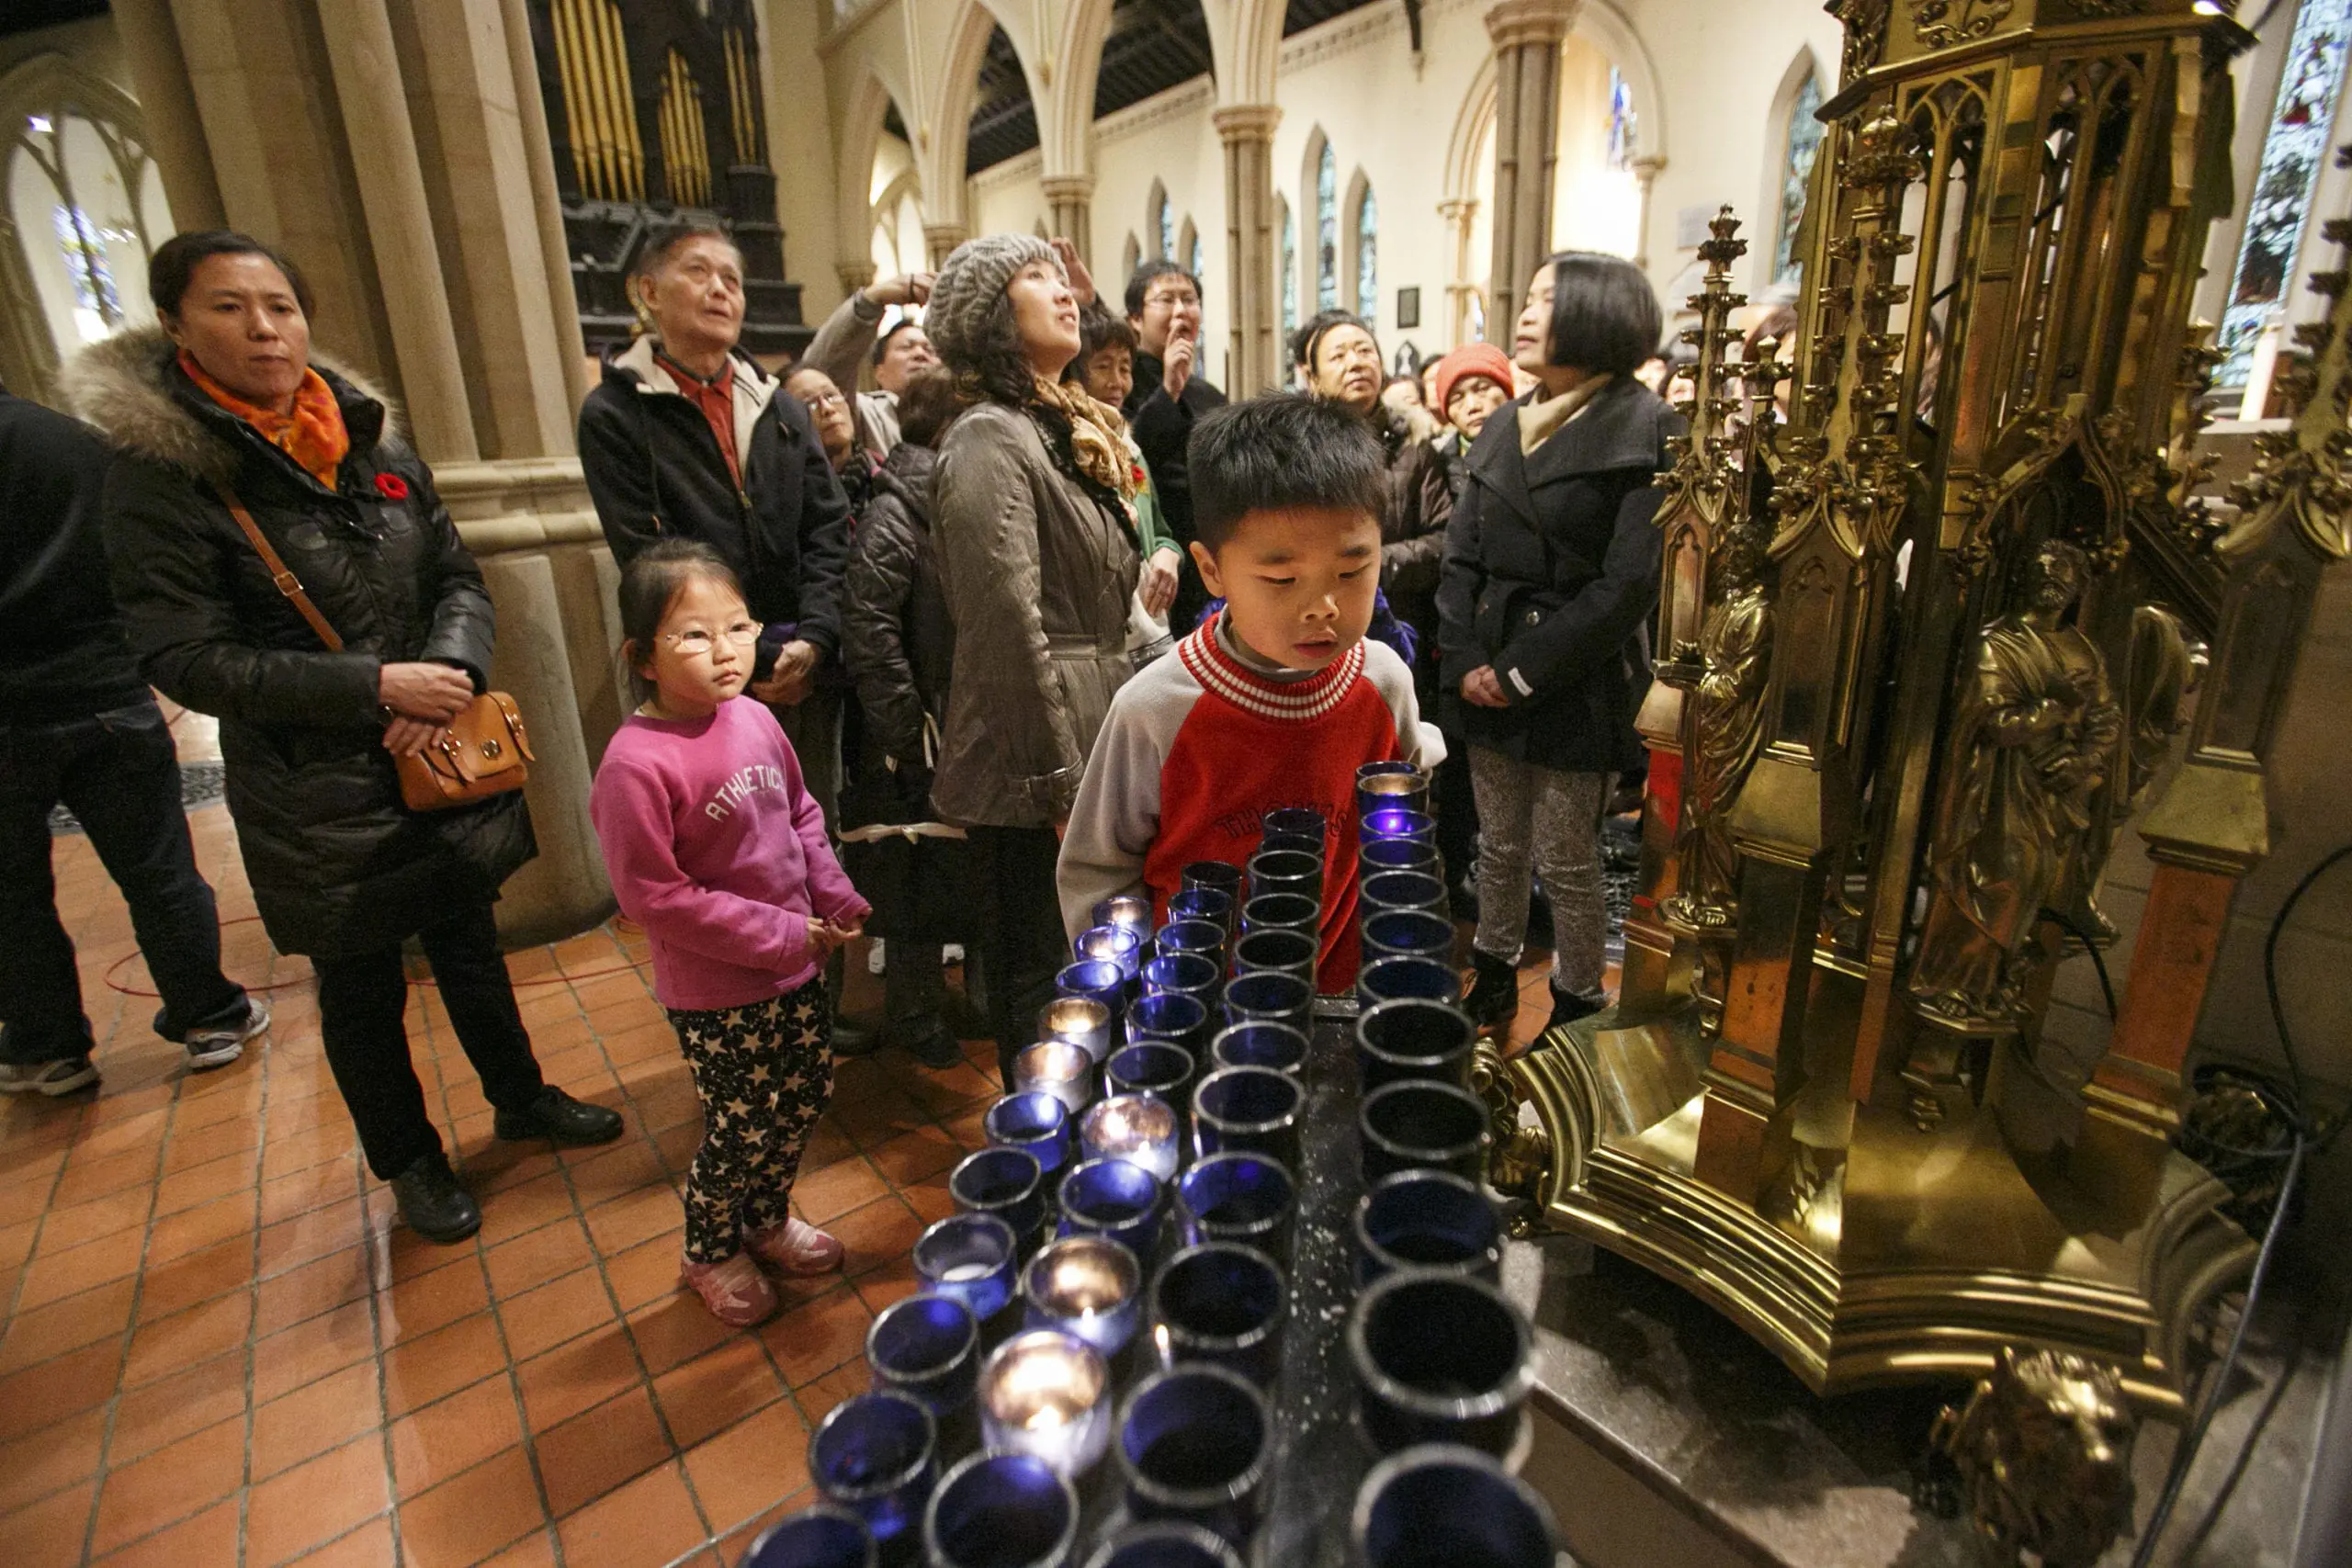 Mandarin ministries hosts Chinese visitors to Cathedral